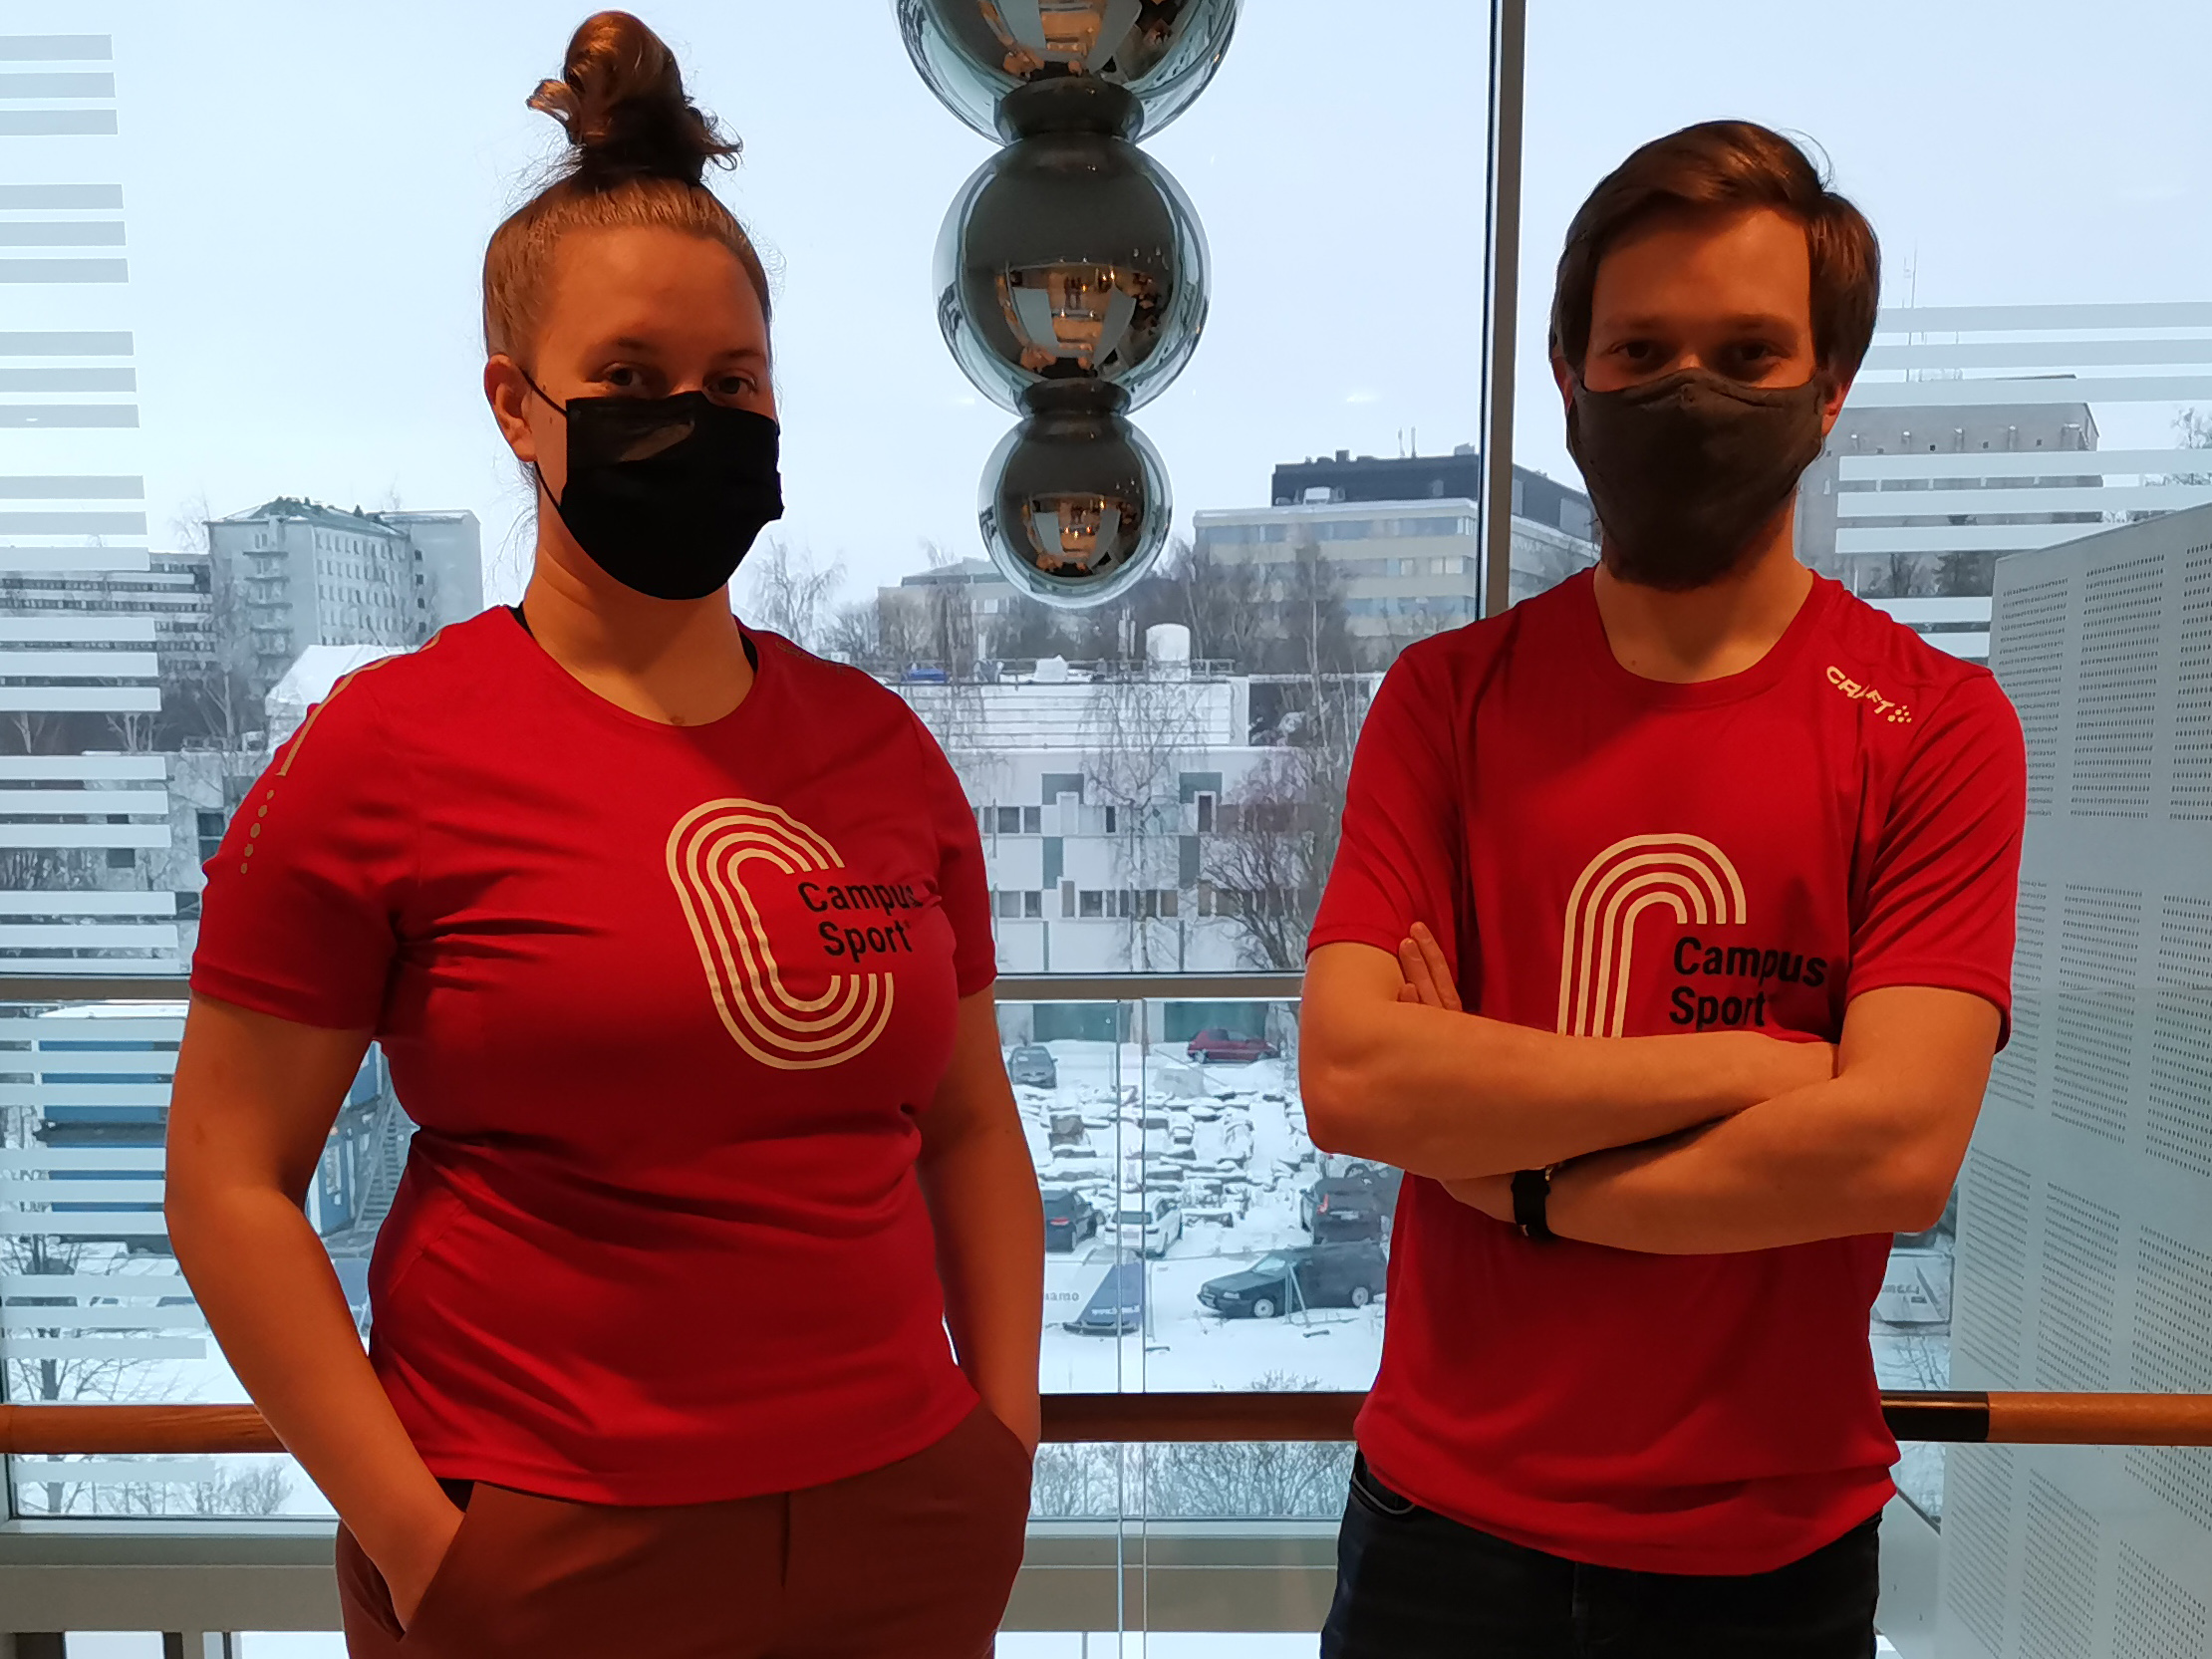 two people wearing CampusSport's shirts